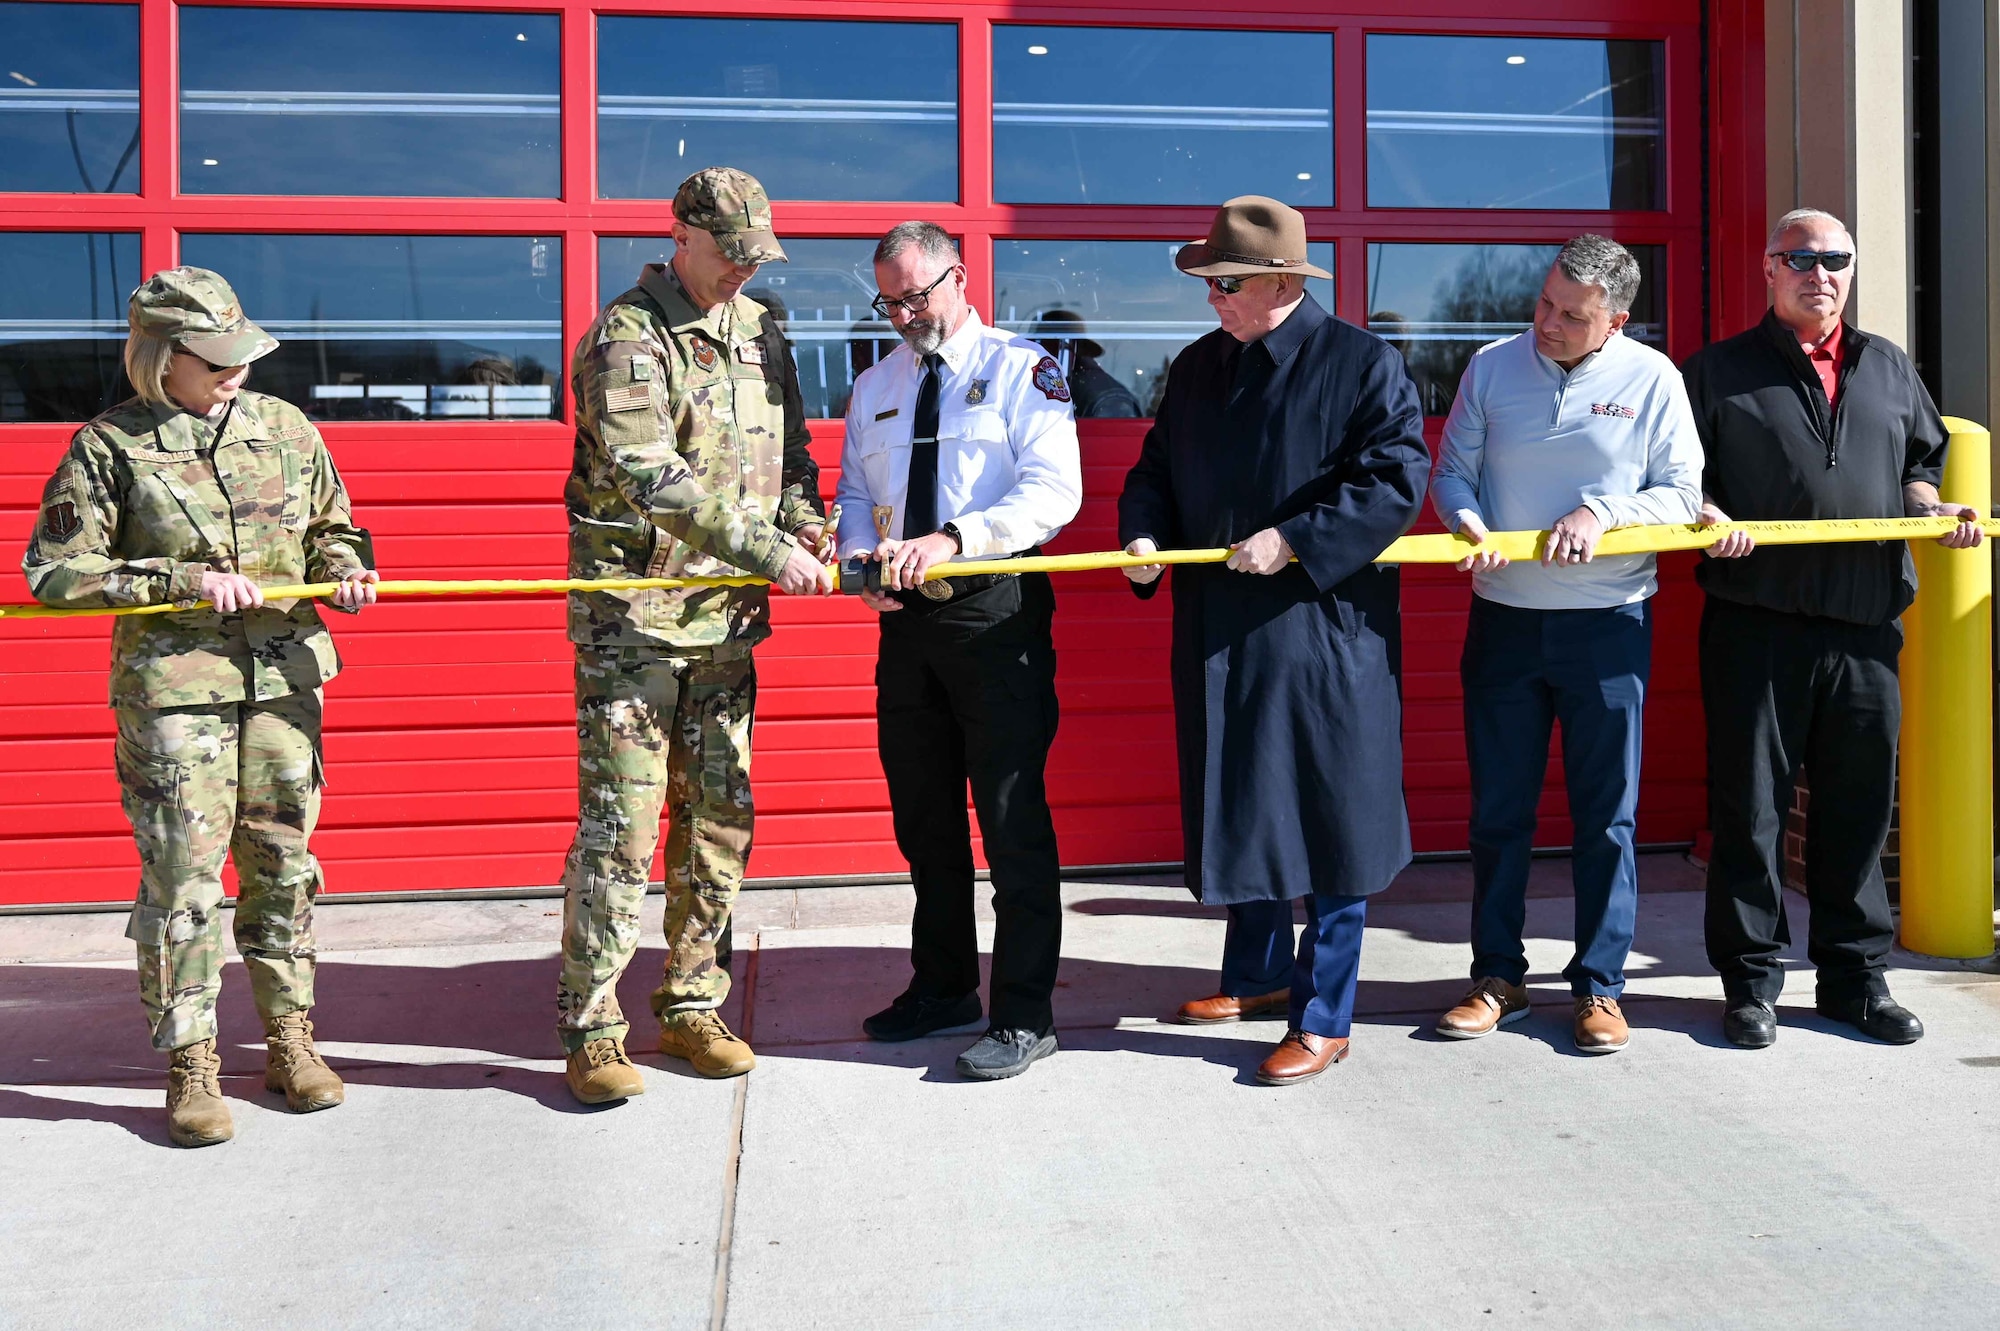 U.S. Air Force Col. Jeff Marshall (left), 97th AMW commander, and Chief Phillip Fourroux (right), 97th Civil Engineer Squadron fire chief, untwist a hose to commemorate the opening of the headquarters fire station at Altus Air Force Base (AFB), Oklahoma, Dec. 1, 2023. Following the commemoration, attendees had the opportunity to tour the station to see what the new facility looks like. (U.S. Air Force photo by Airman 1st Class Kari Degraffenreed)